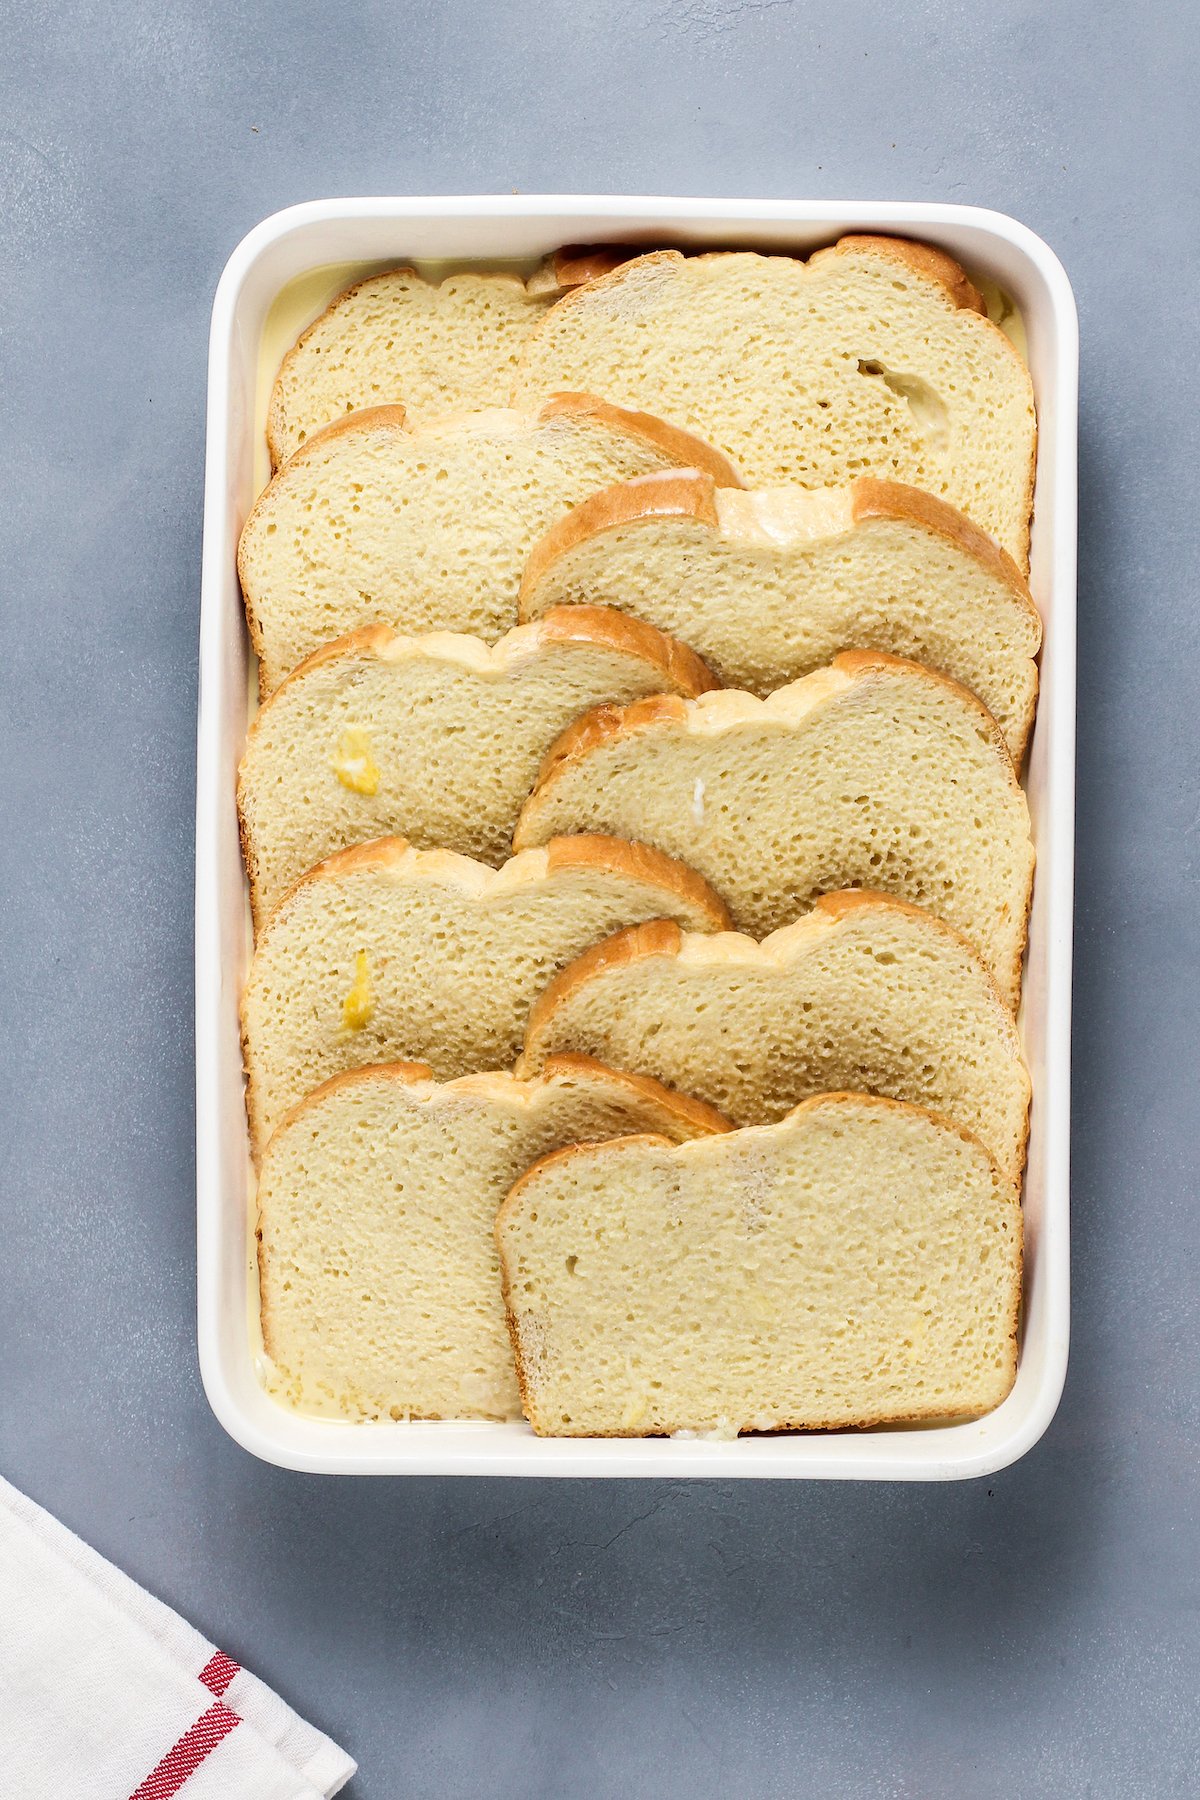 A baking dish of sliced bread that has been soaked in custard mixture.